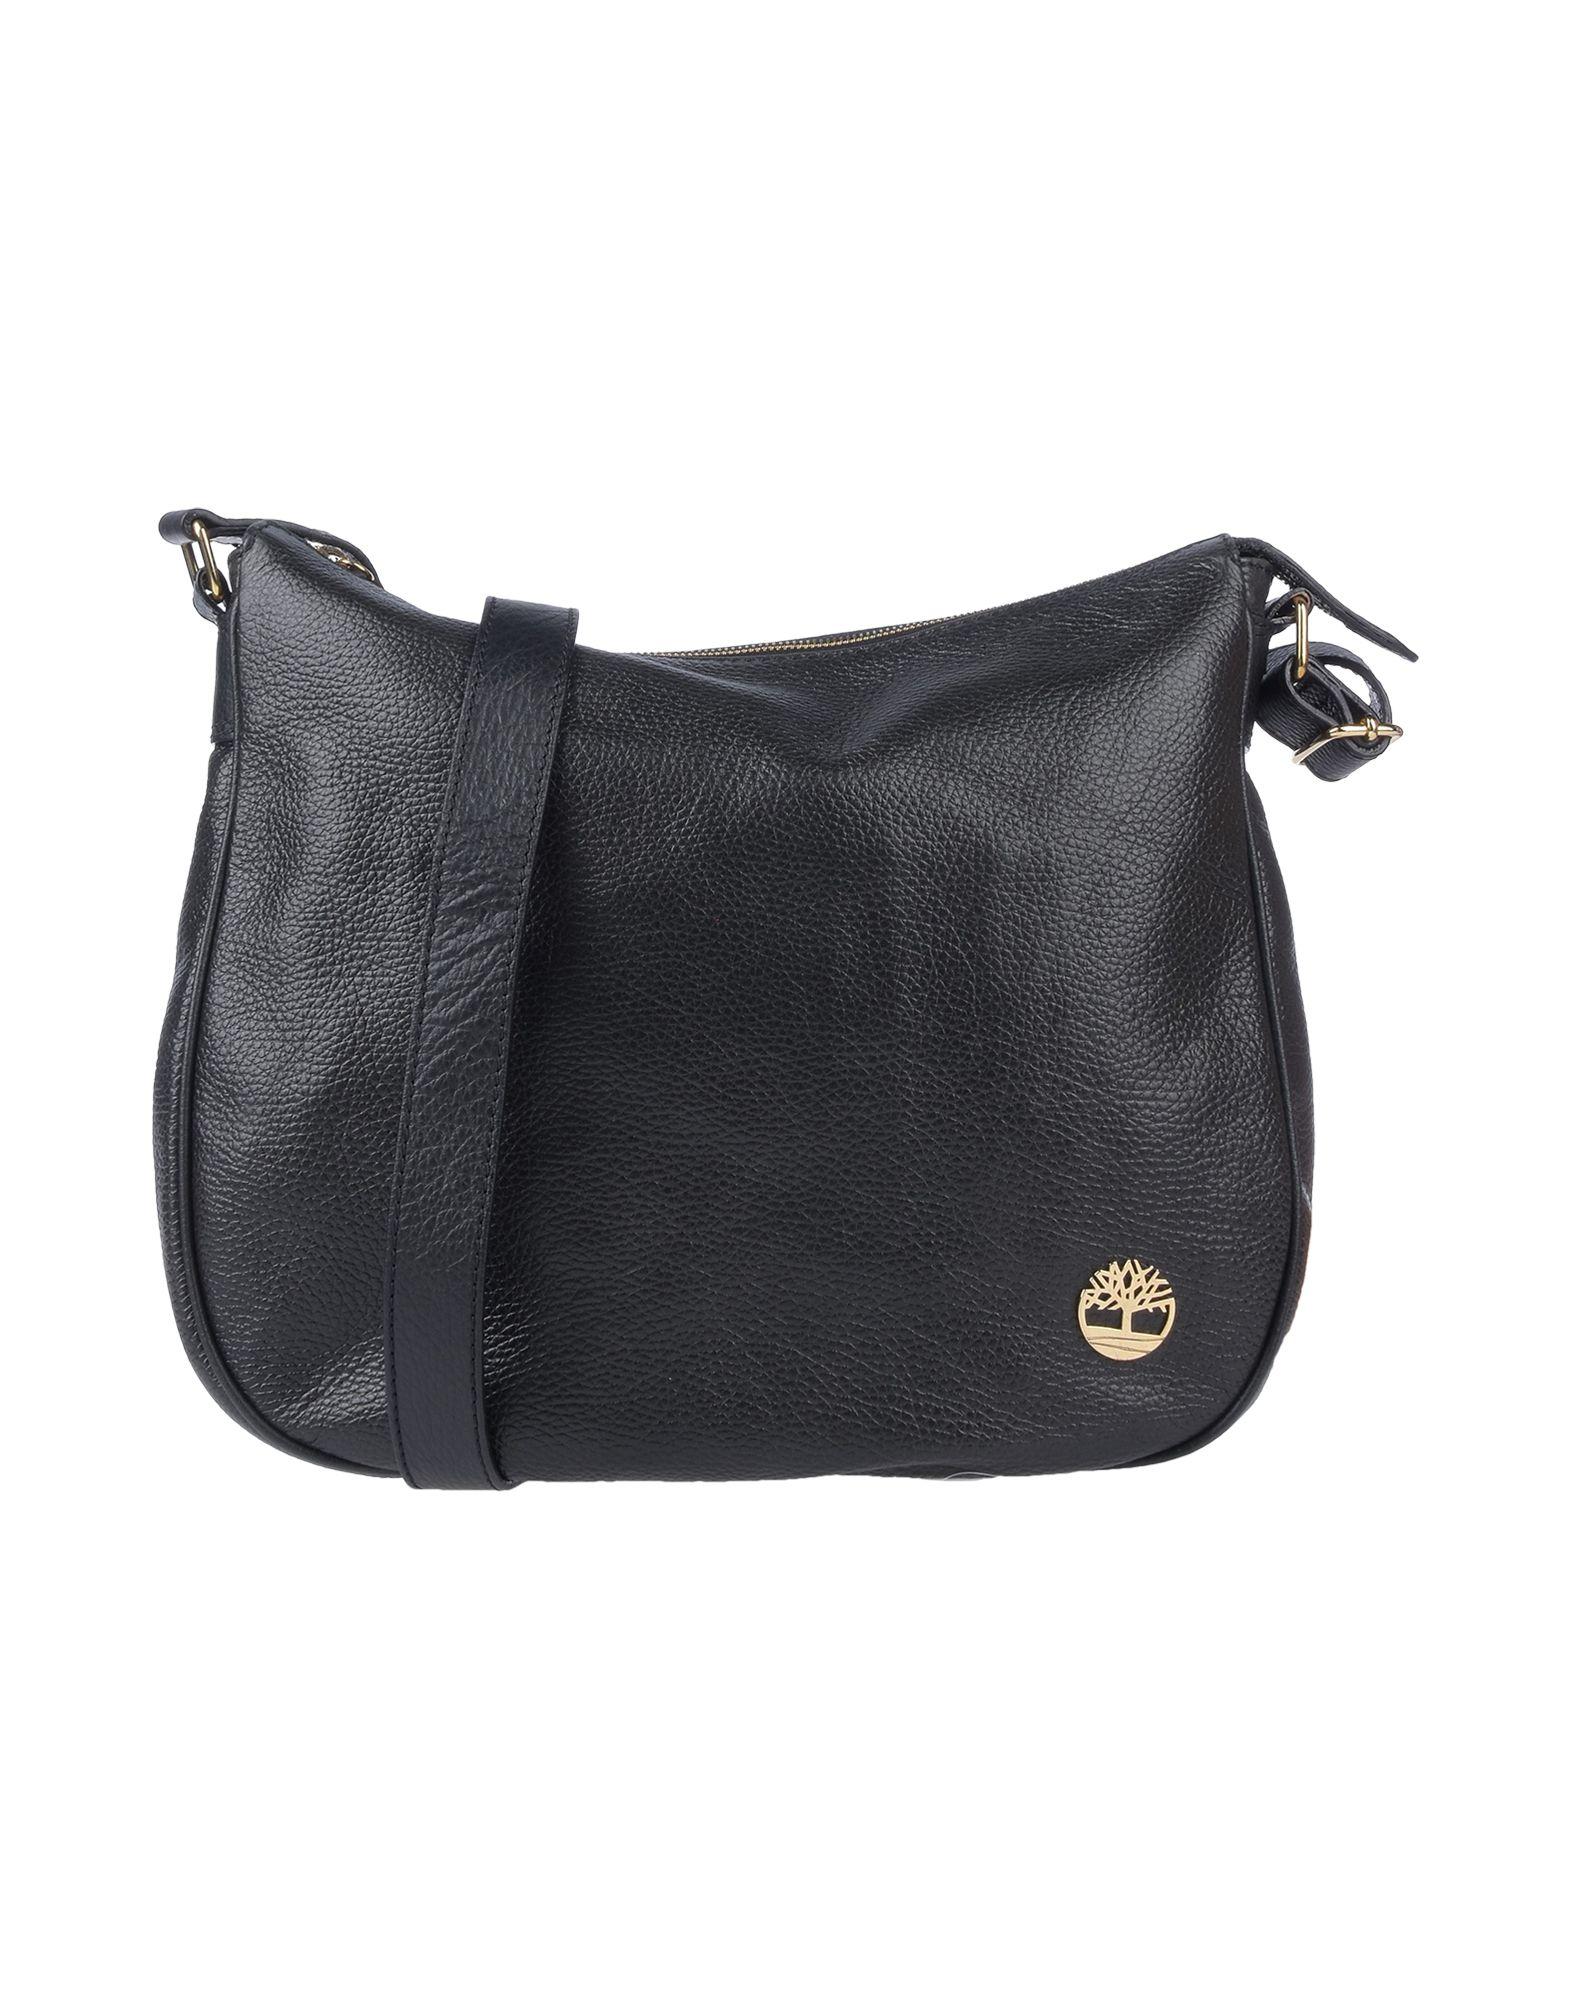 Timberland Leather Cross-body Bag in Black - Lyst